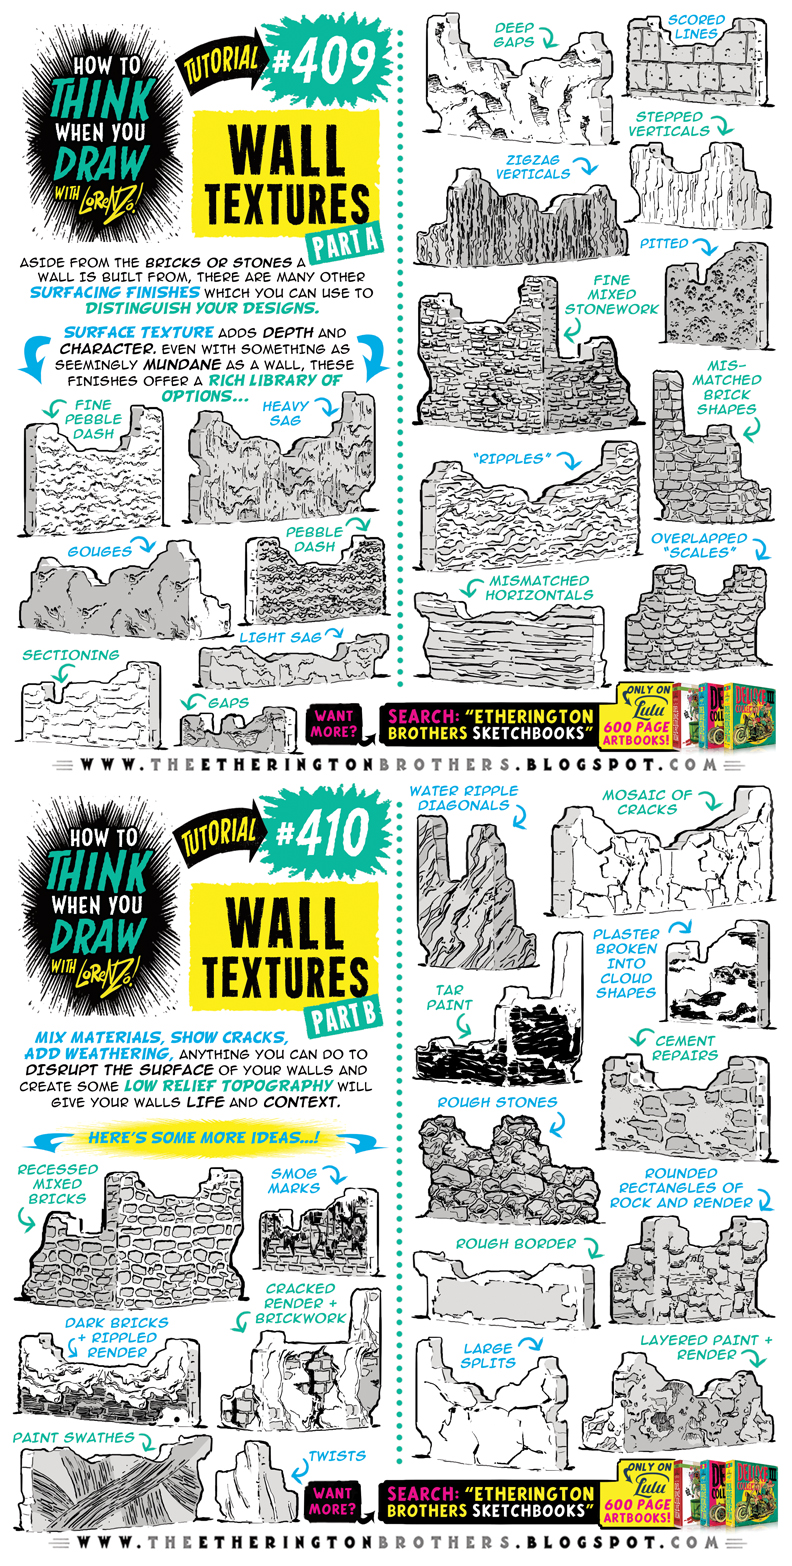 How To Think When You Draw Wall Textures Tutorial By Etheringtonbrothers On Deviantart